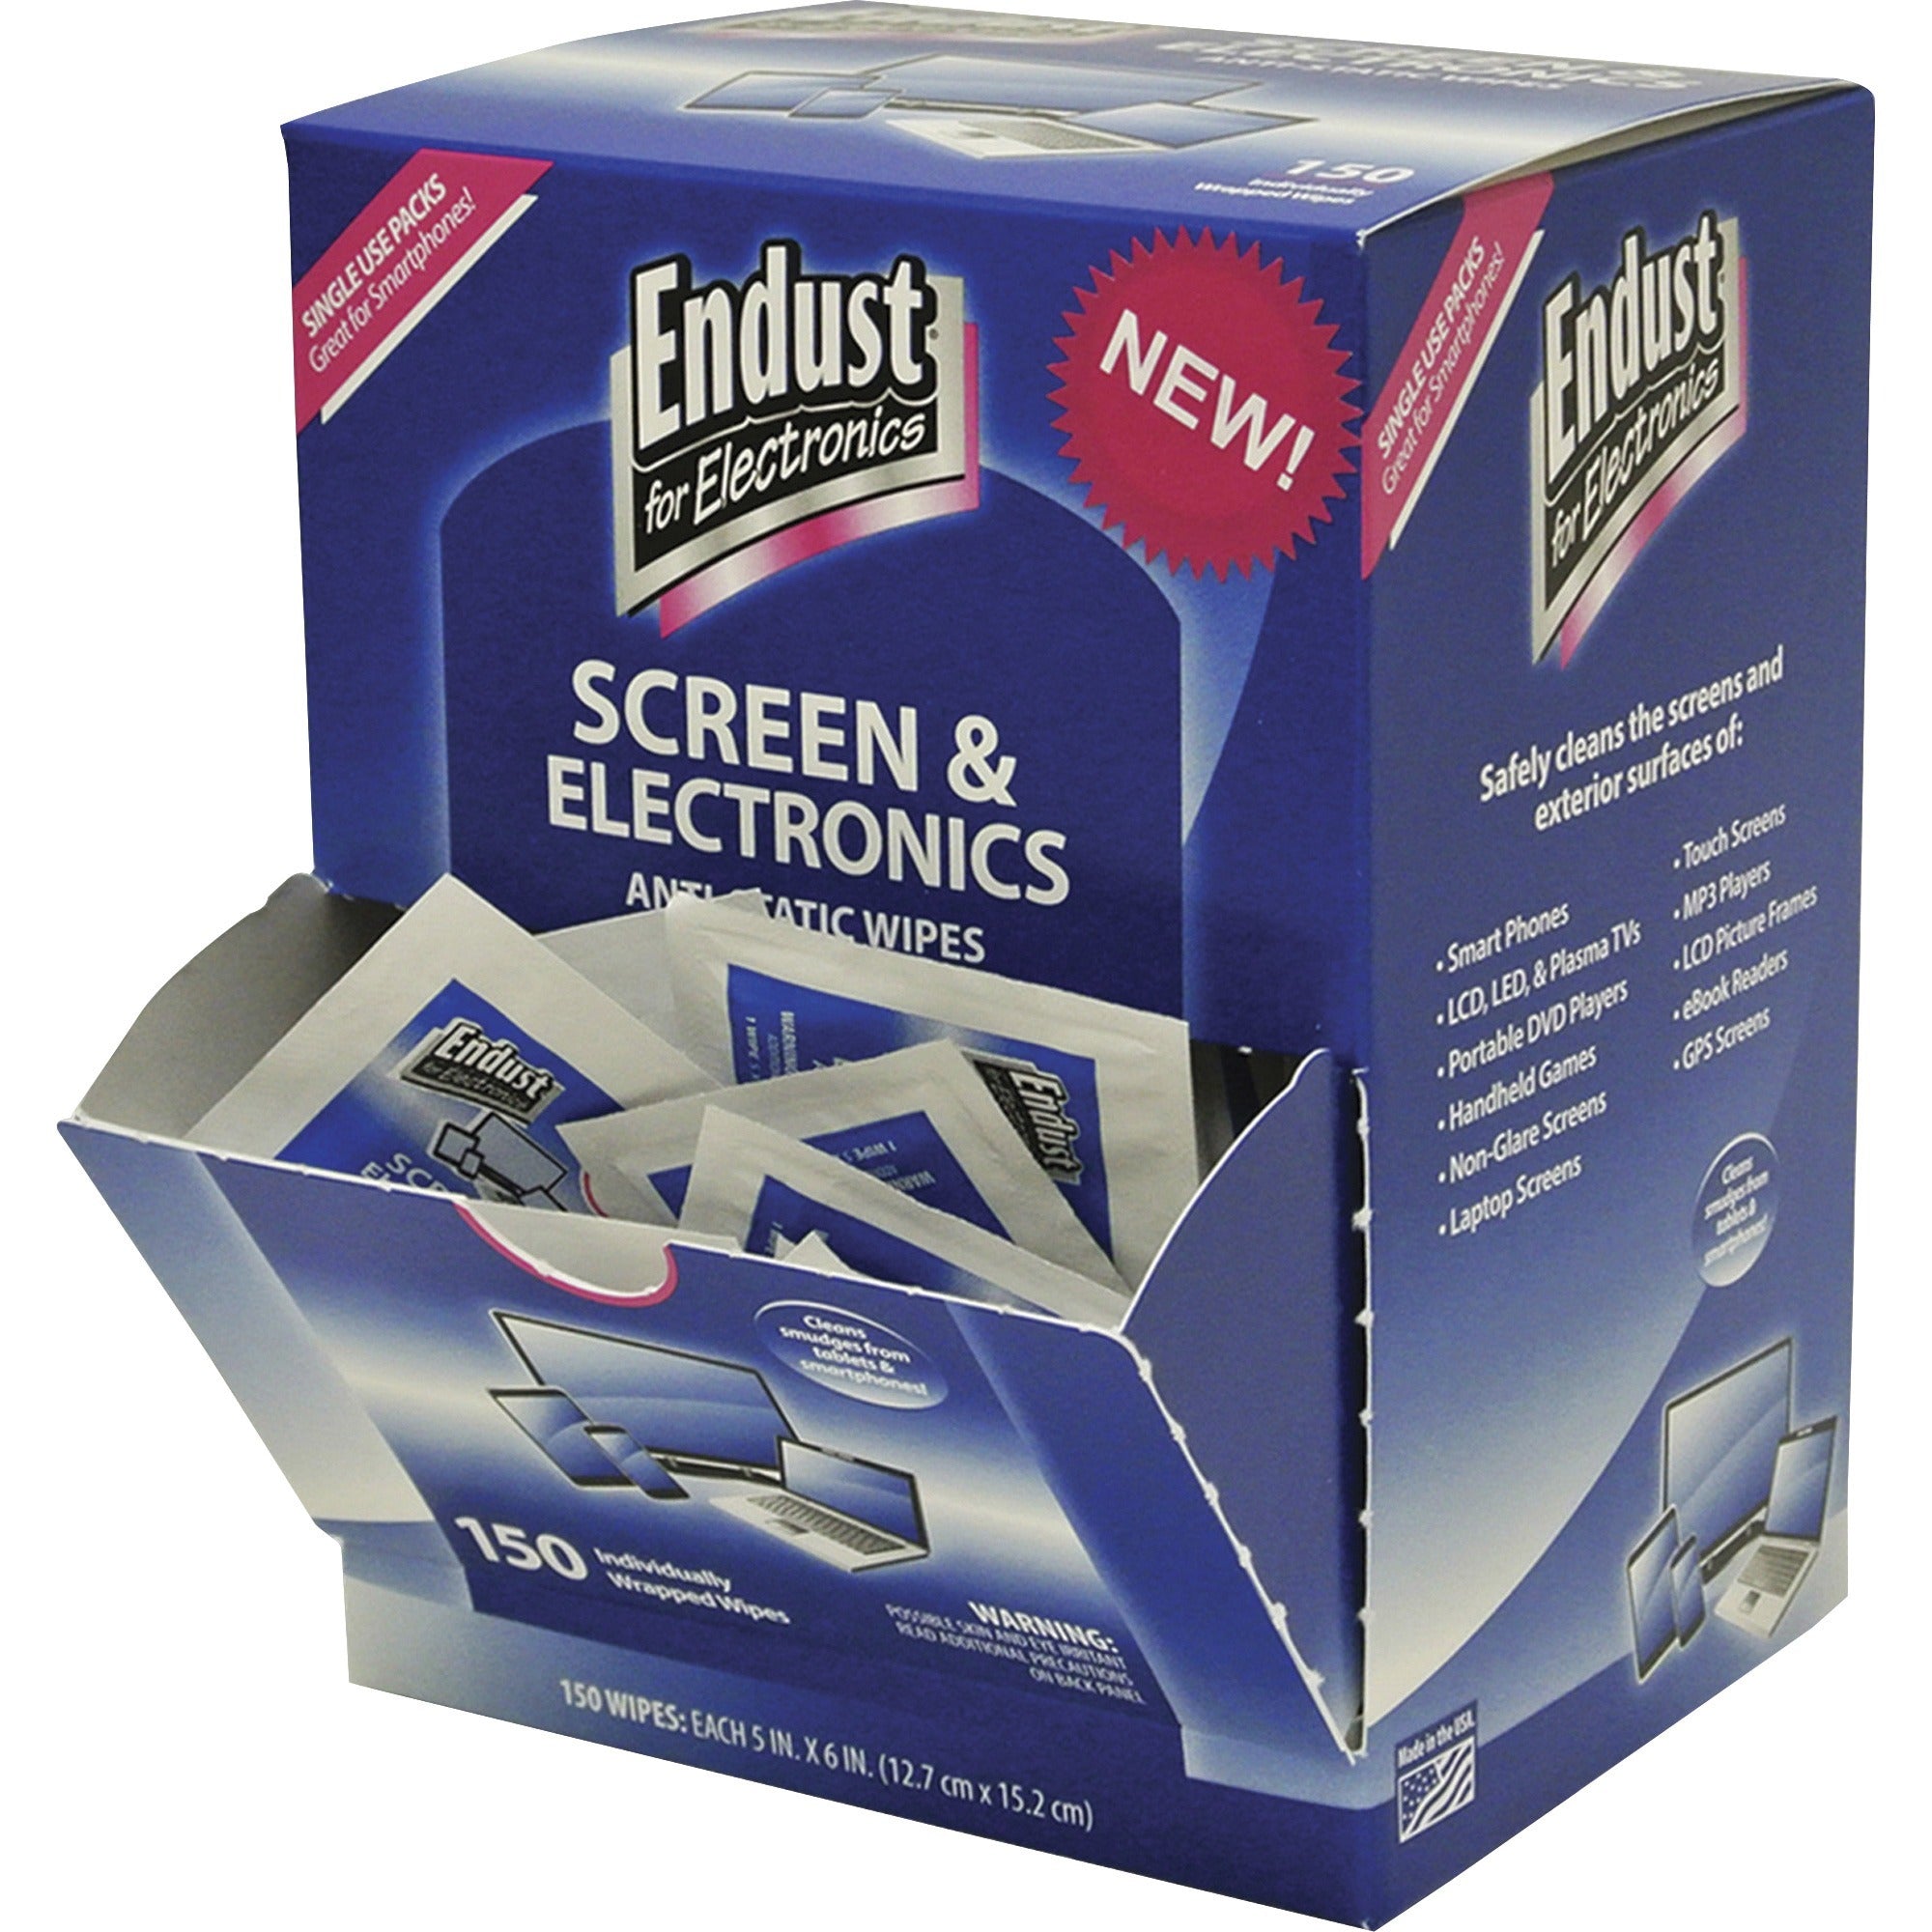 endust-screen-electronics-clean-wipes-for-smartphone-handheld-device-notebook-lcd-gps-navigation-system-display-screen-anti-static-alcohol-free-ammonia-free-soft-non-abrasive-150-pack-blue_nrz14316 - 1